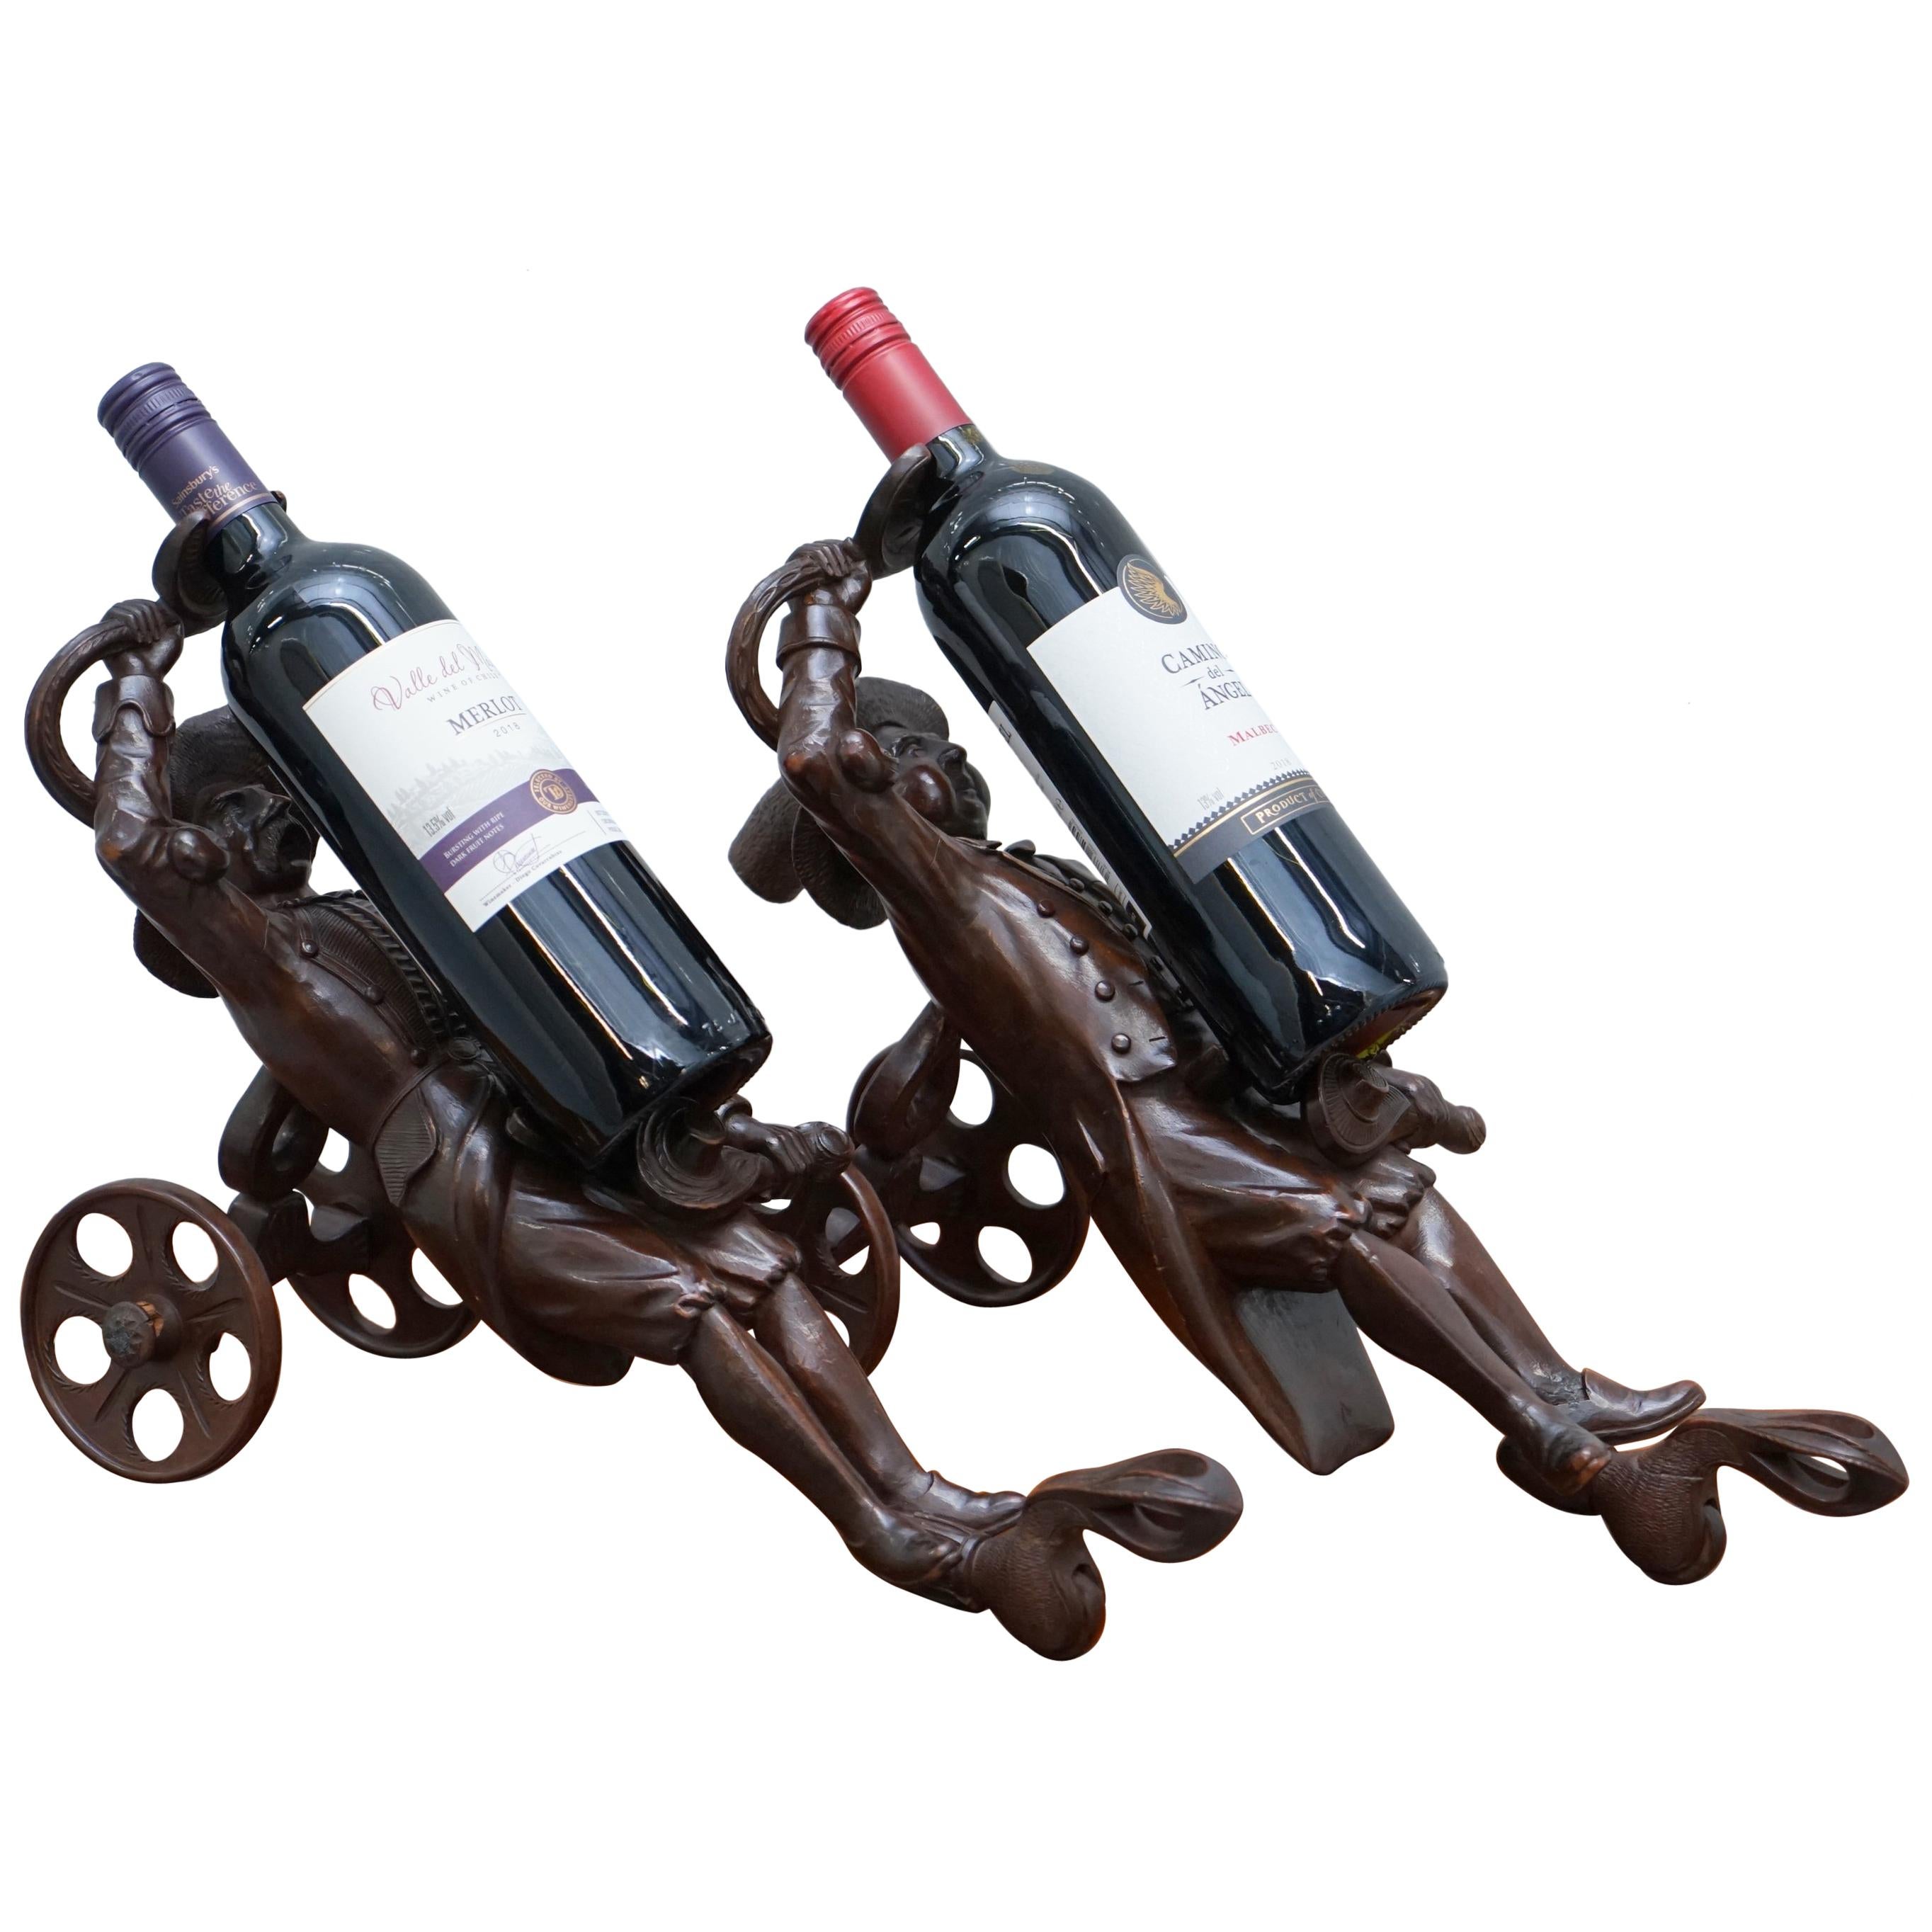 Rare Pair of Original circa 1880 Black Forest Carved Wood Wine Bottle Holders